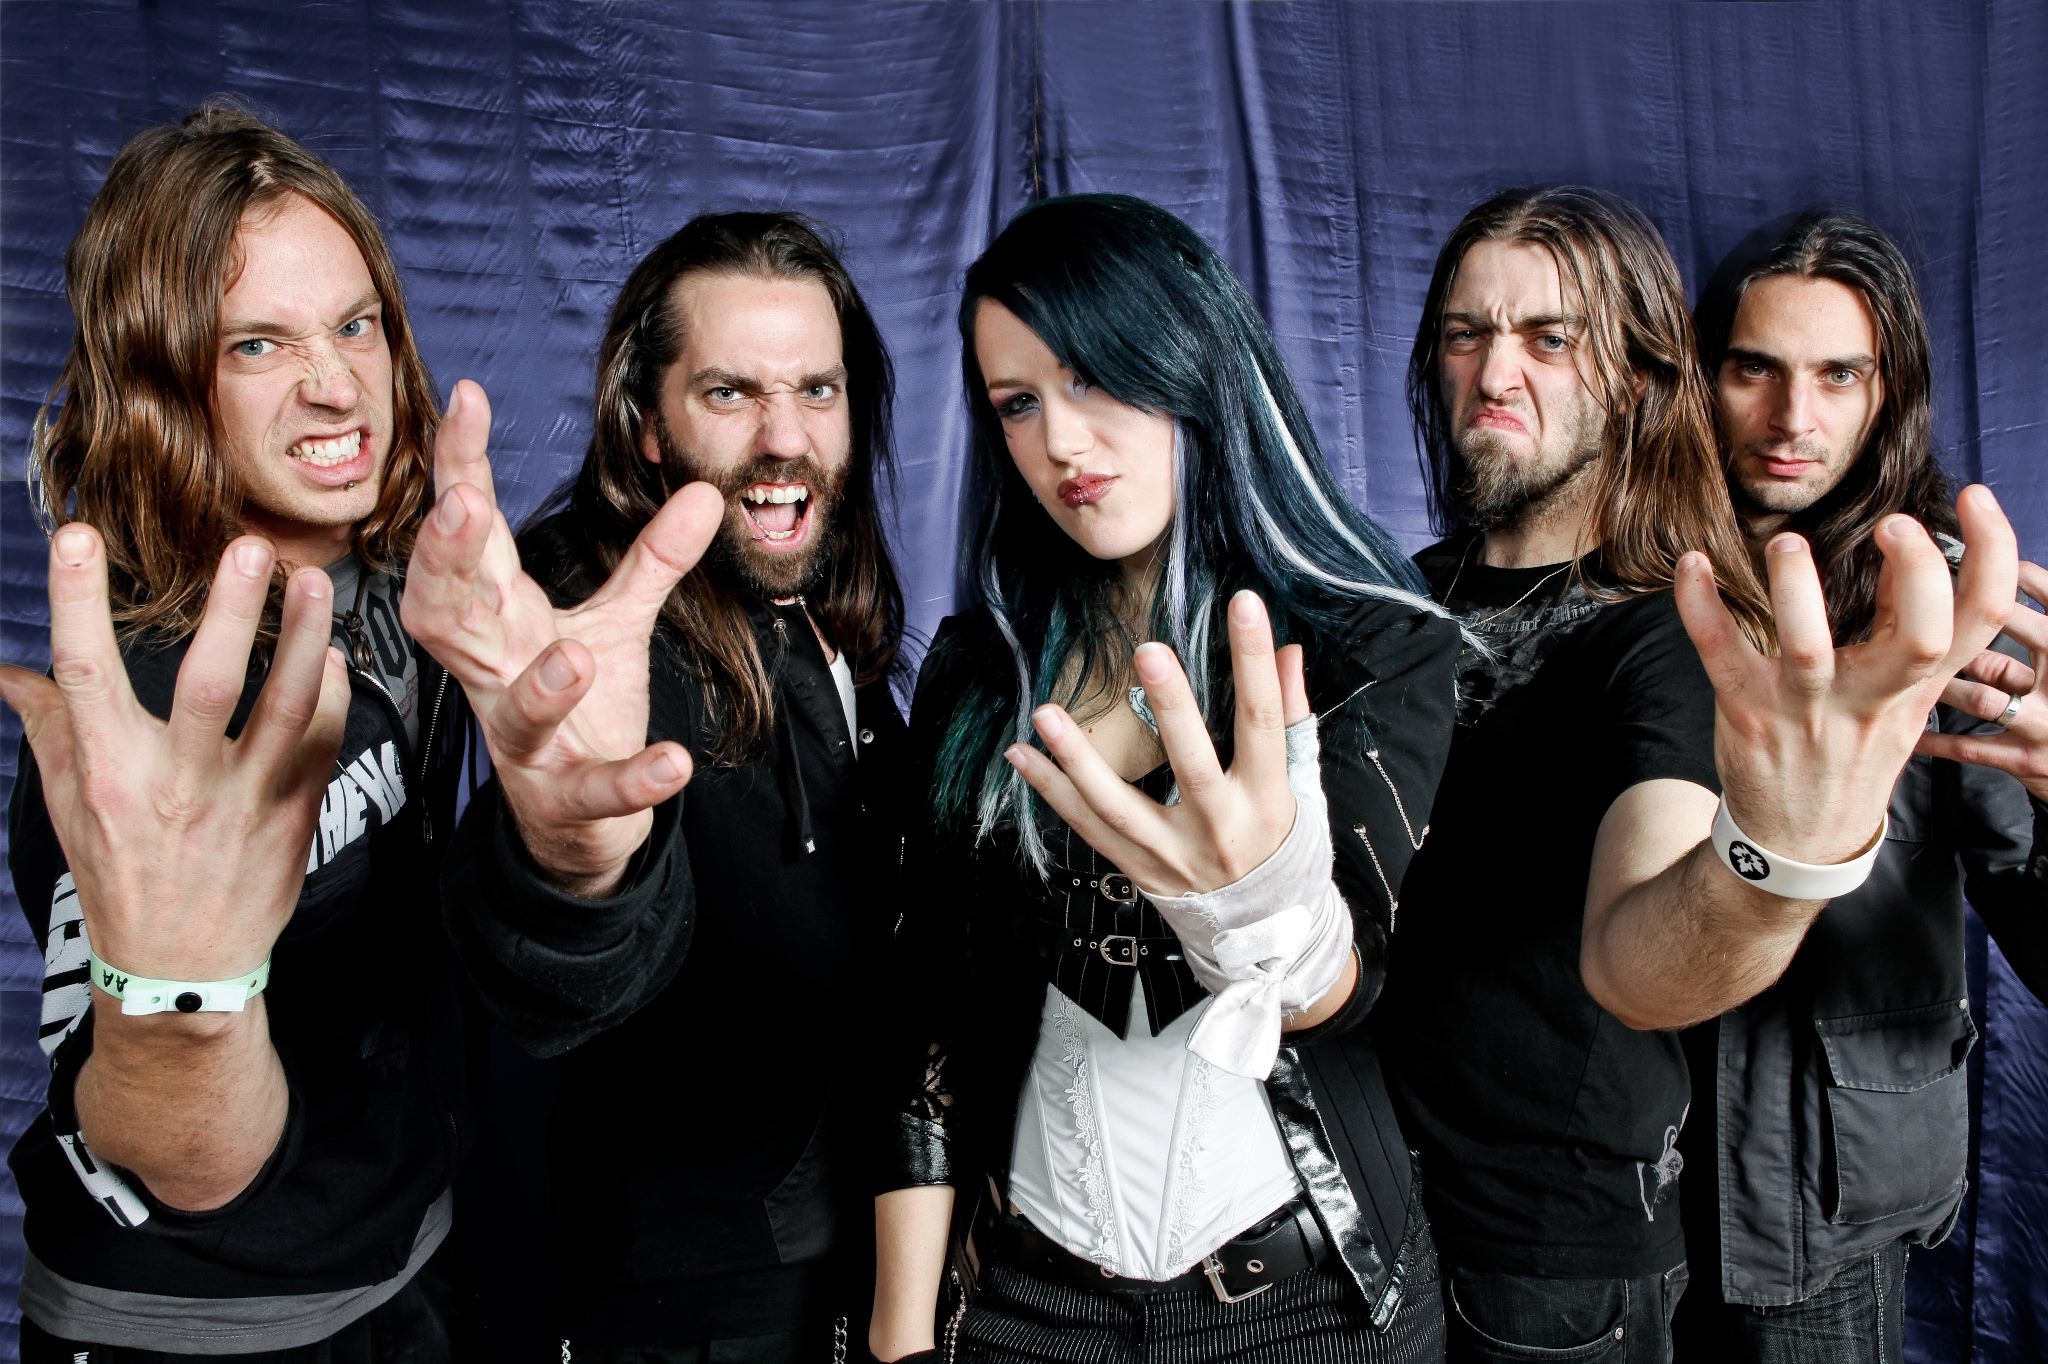 2048x1364 The Agonist - Bands, Images metal The Agonist - Bands Metal bands pictures  and photos - Metalship Wallpapers